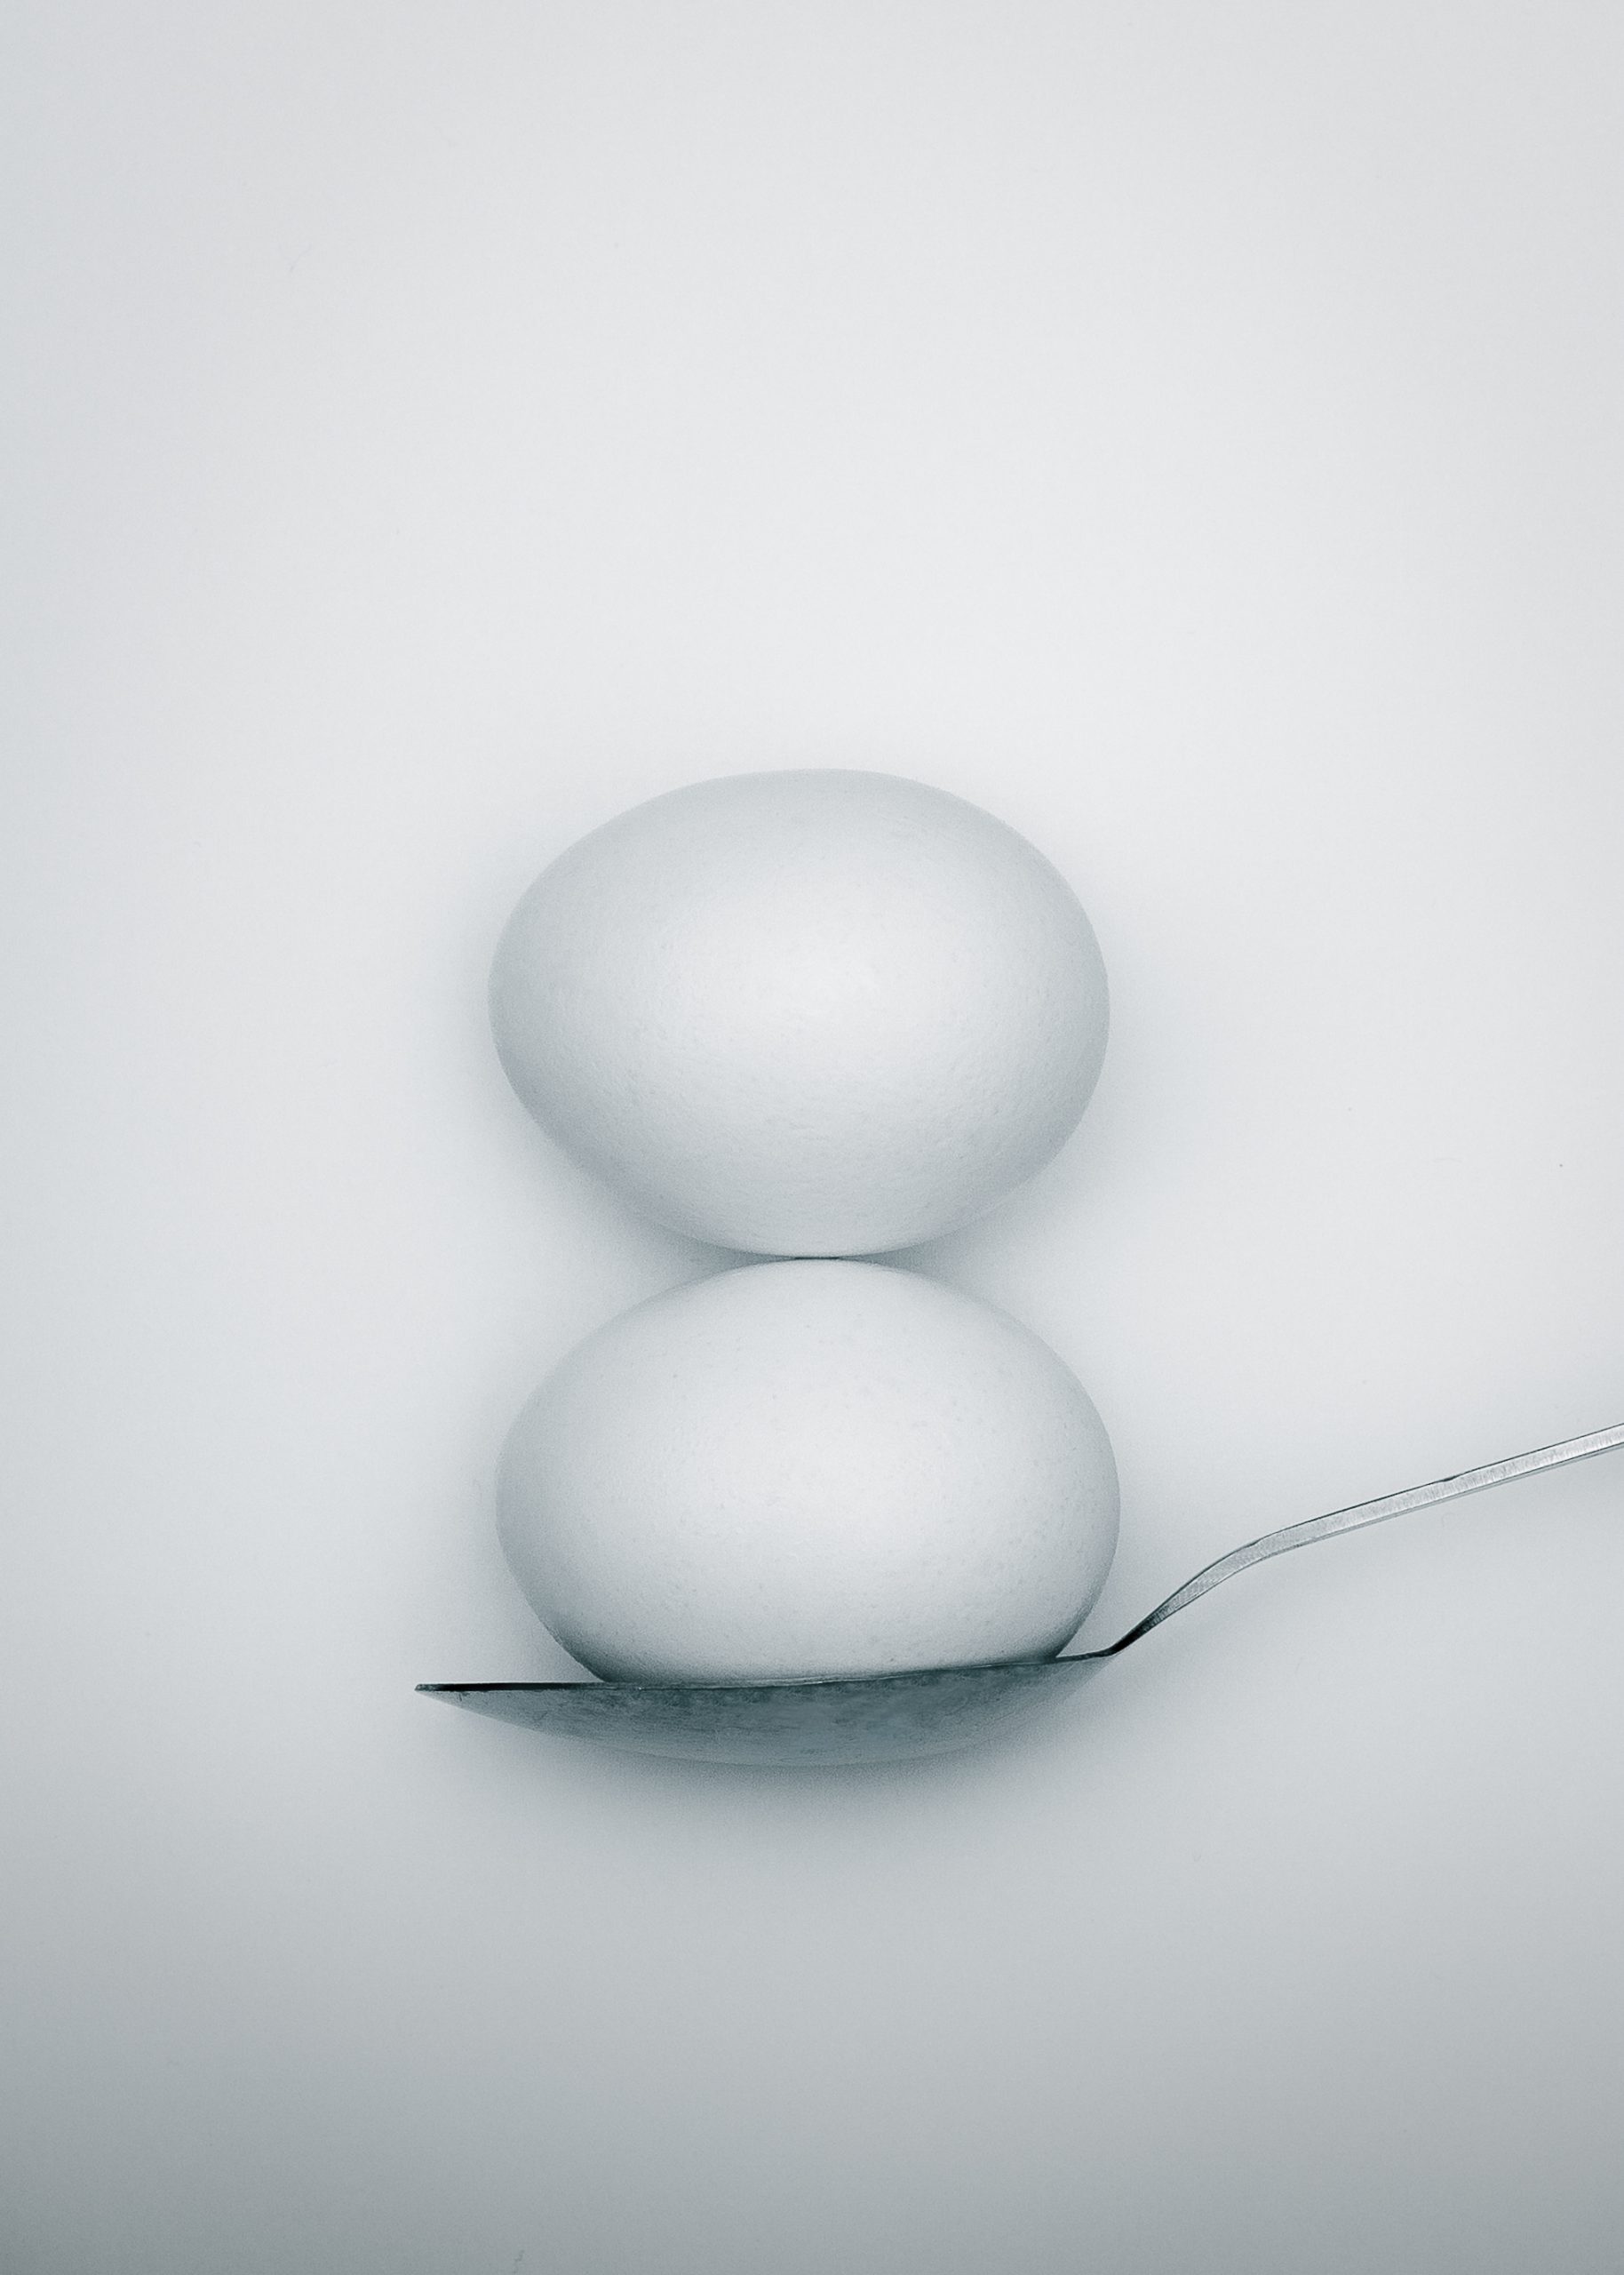 two whole eggs balancing on spoon